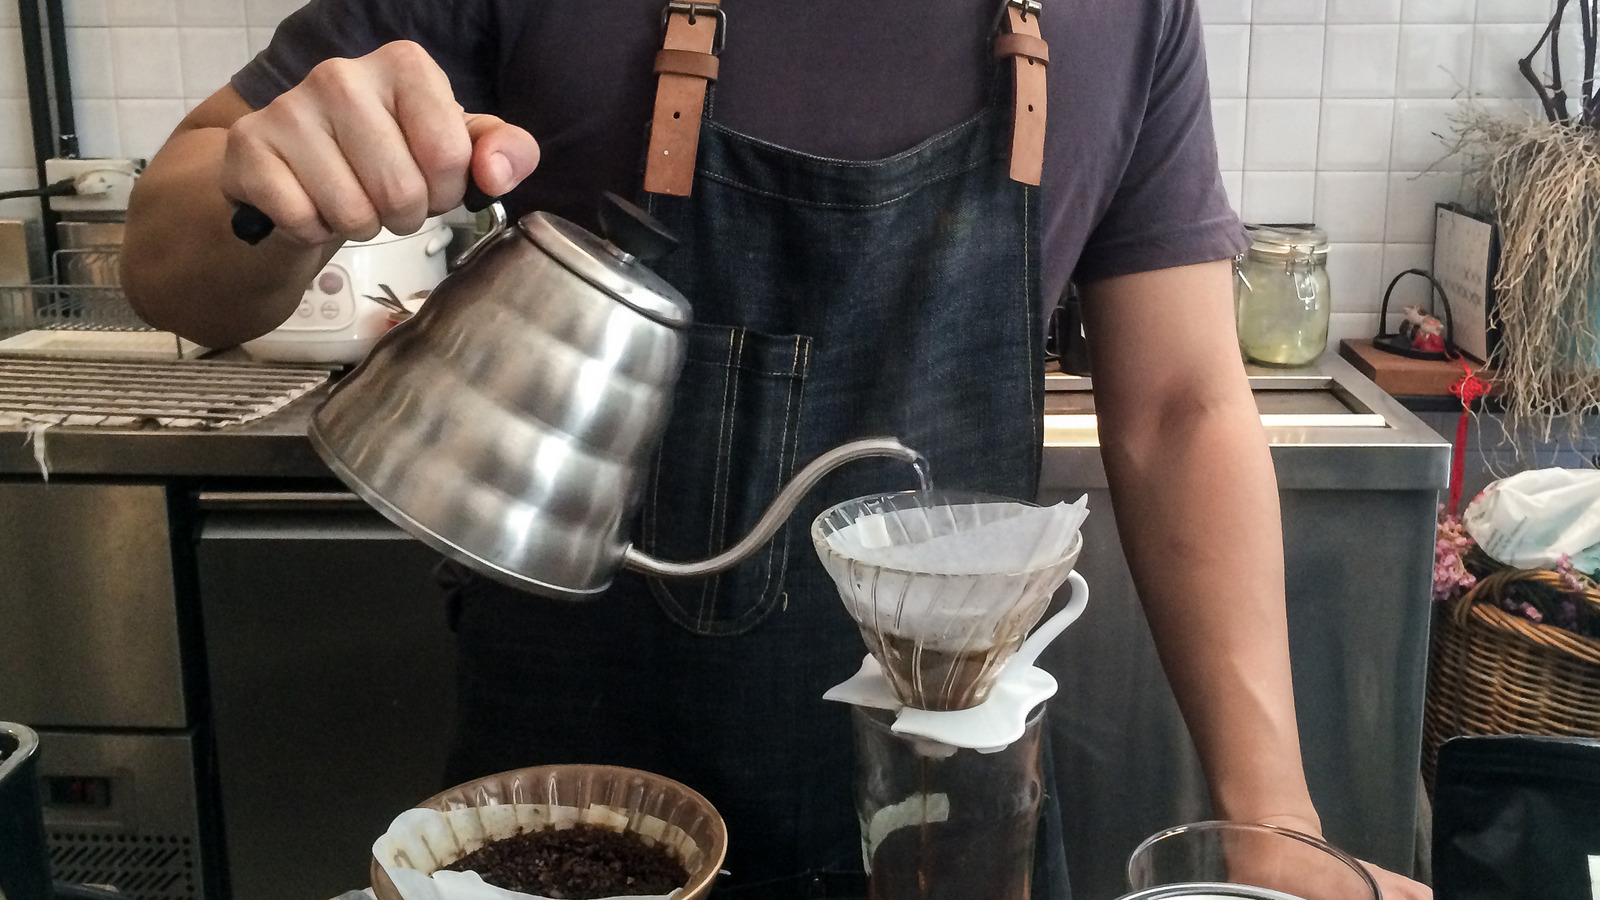 https://www.tastingtable.com/img/gallery/why-a-gooseneck-kettle-is-key-for-perfect-pour-over-coffee/l-intro-1669746702.jpg